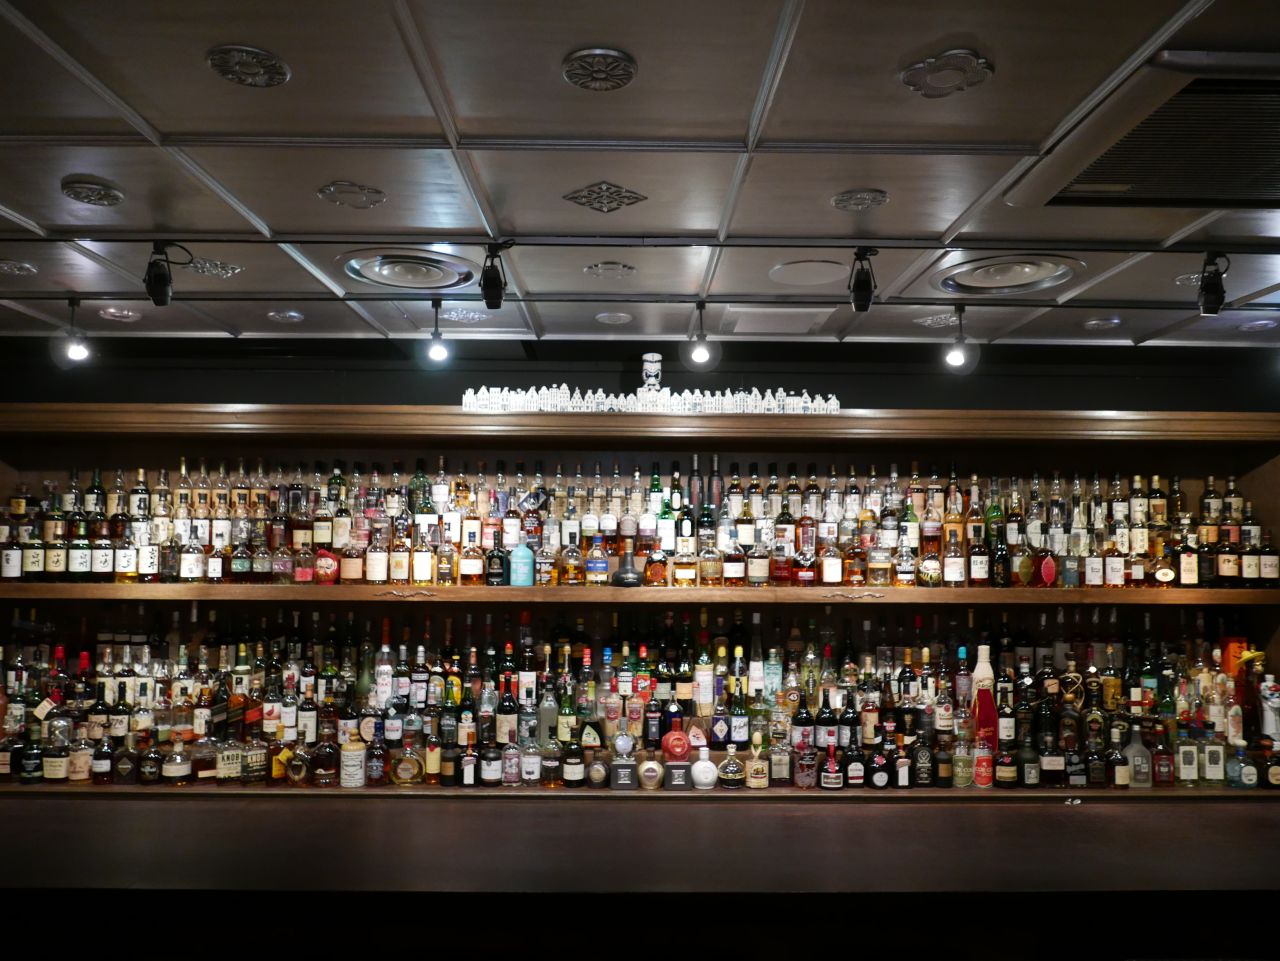 <strong>Trophy case:</strong> Given there are thousands of hole-in-the-wall bars in Tokyo, sometimes it's hard to know where to start. But Bar High Five -- ranked the third best bar by Asia's 50 Best Bars 2017 and 13th by World's 50 Best Bars 2017 -- tends to draw a crowd.